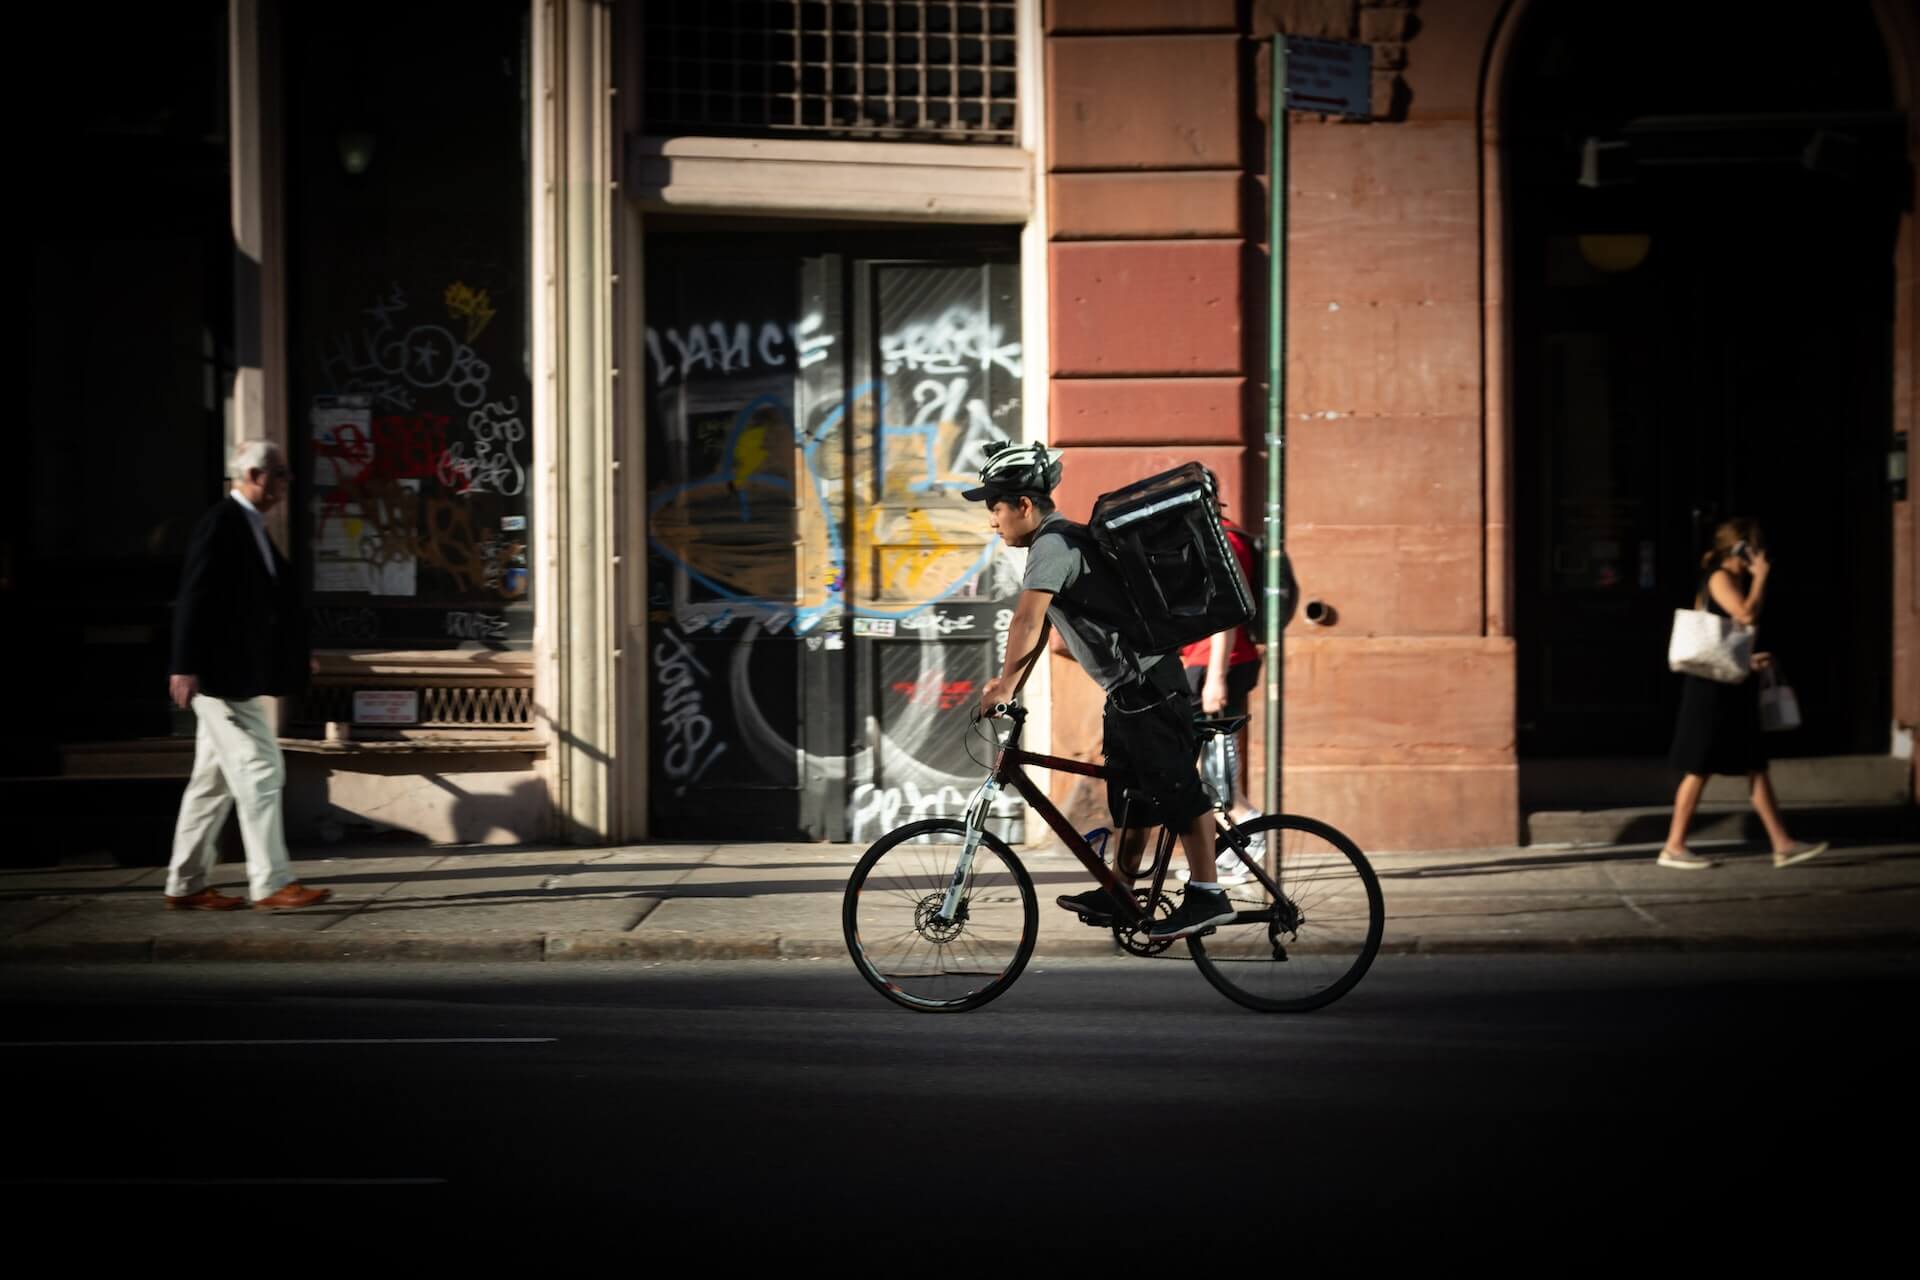 Delivery worker on bicycle on city street